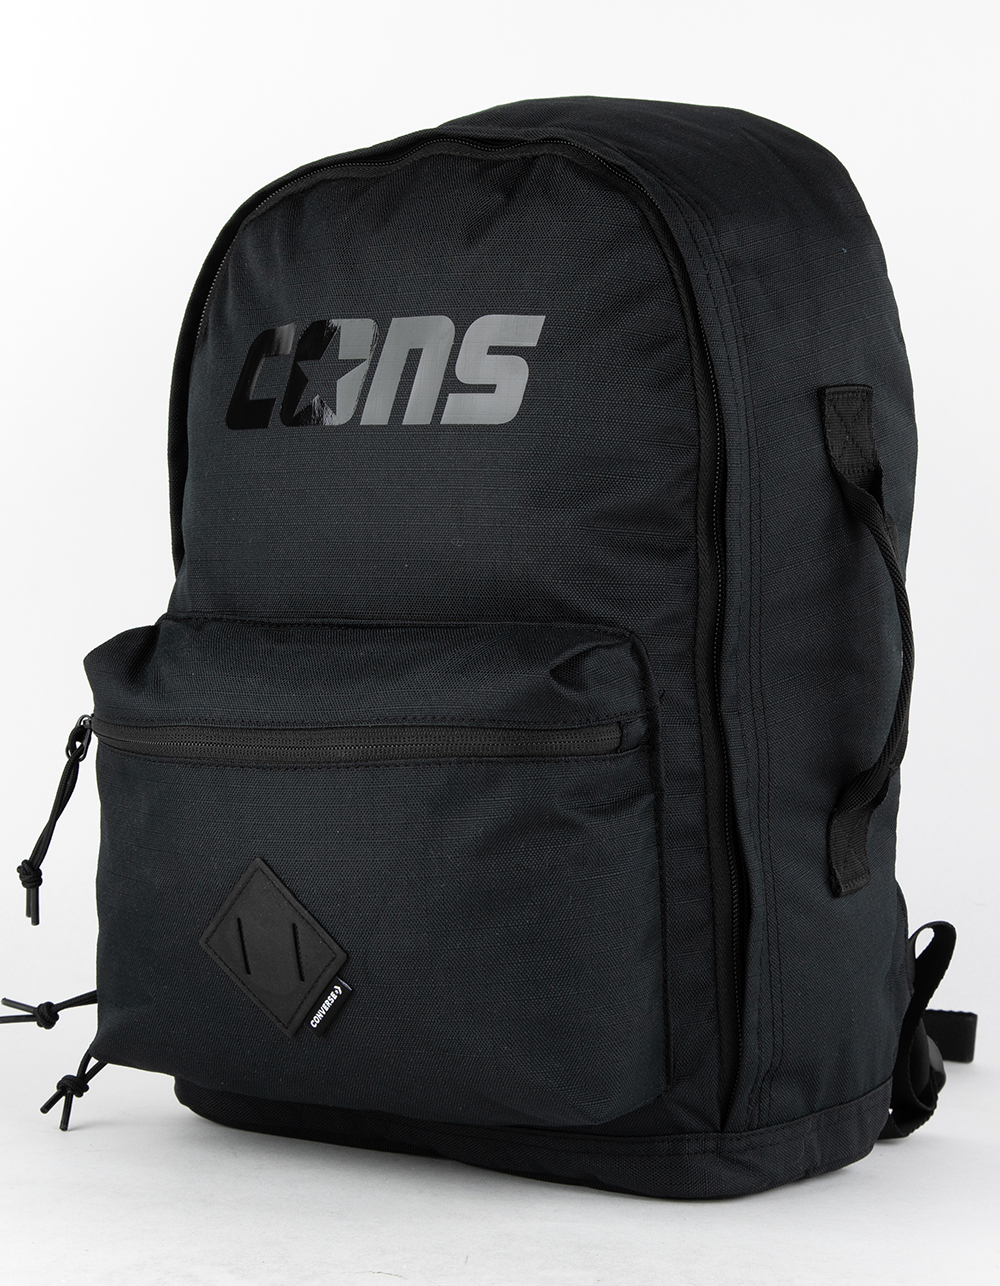 CONVERSE CONS Go 2 Backpack - BLACK | Tillys